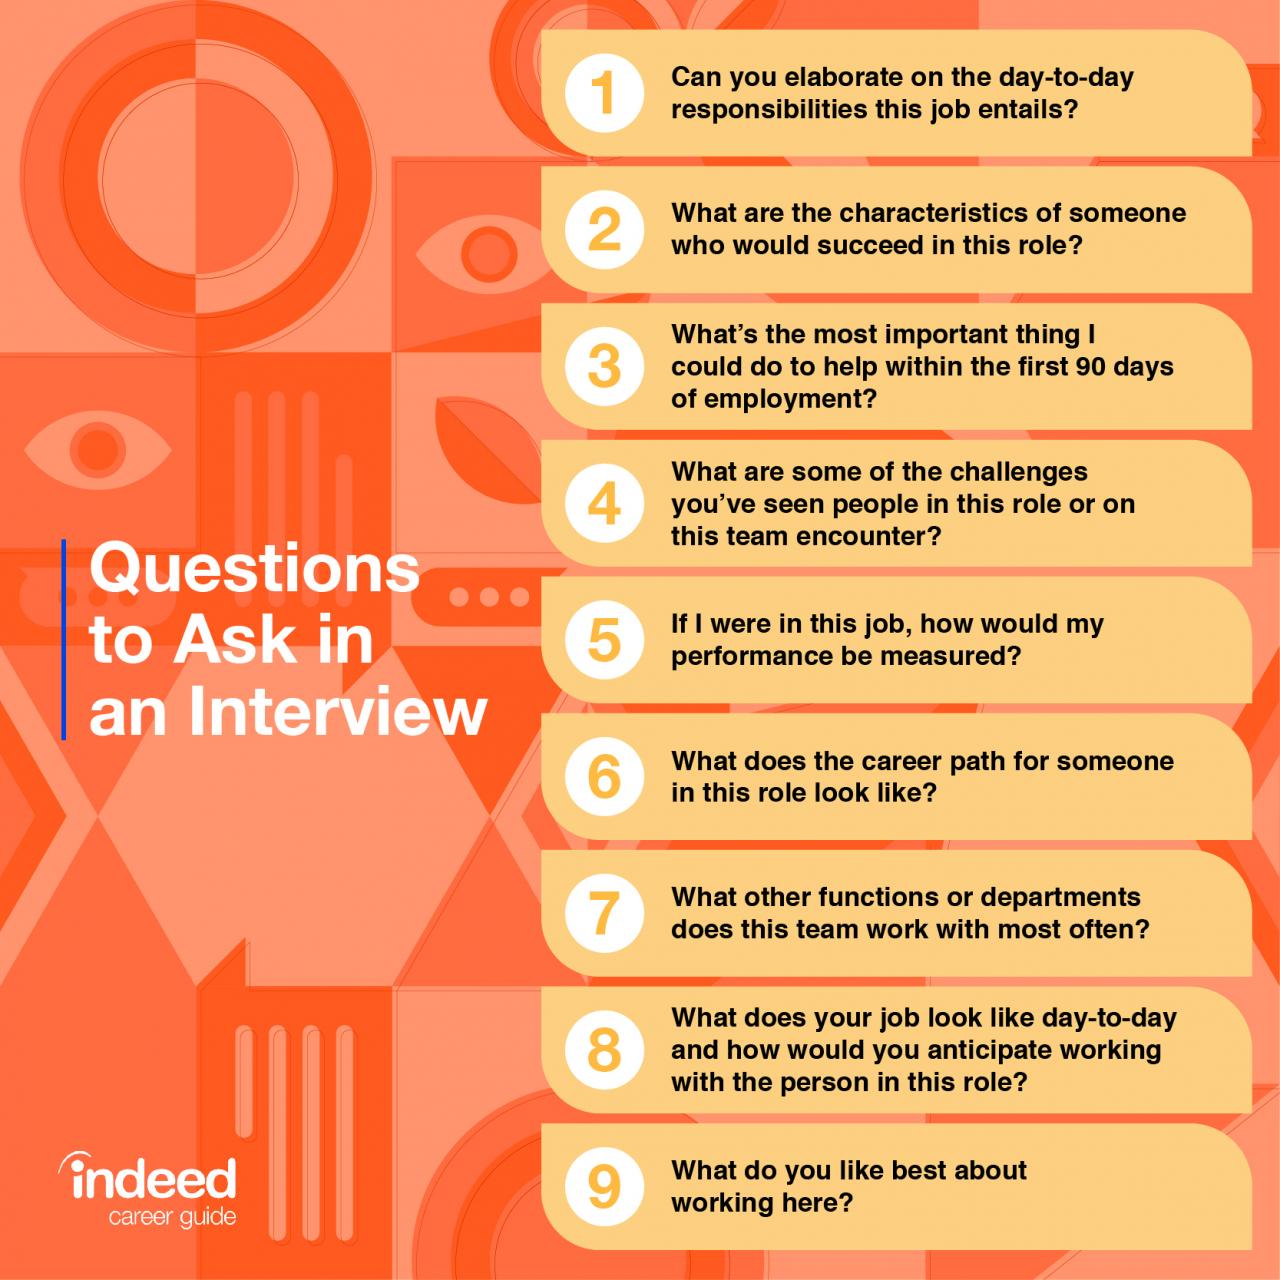 5 good questions to ask during an interview